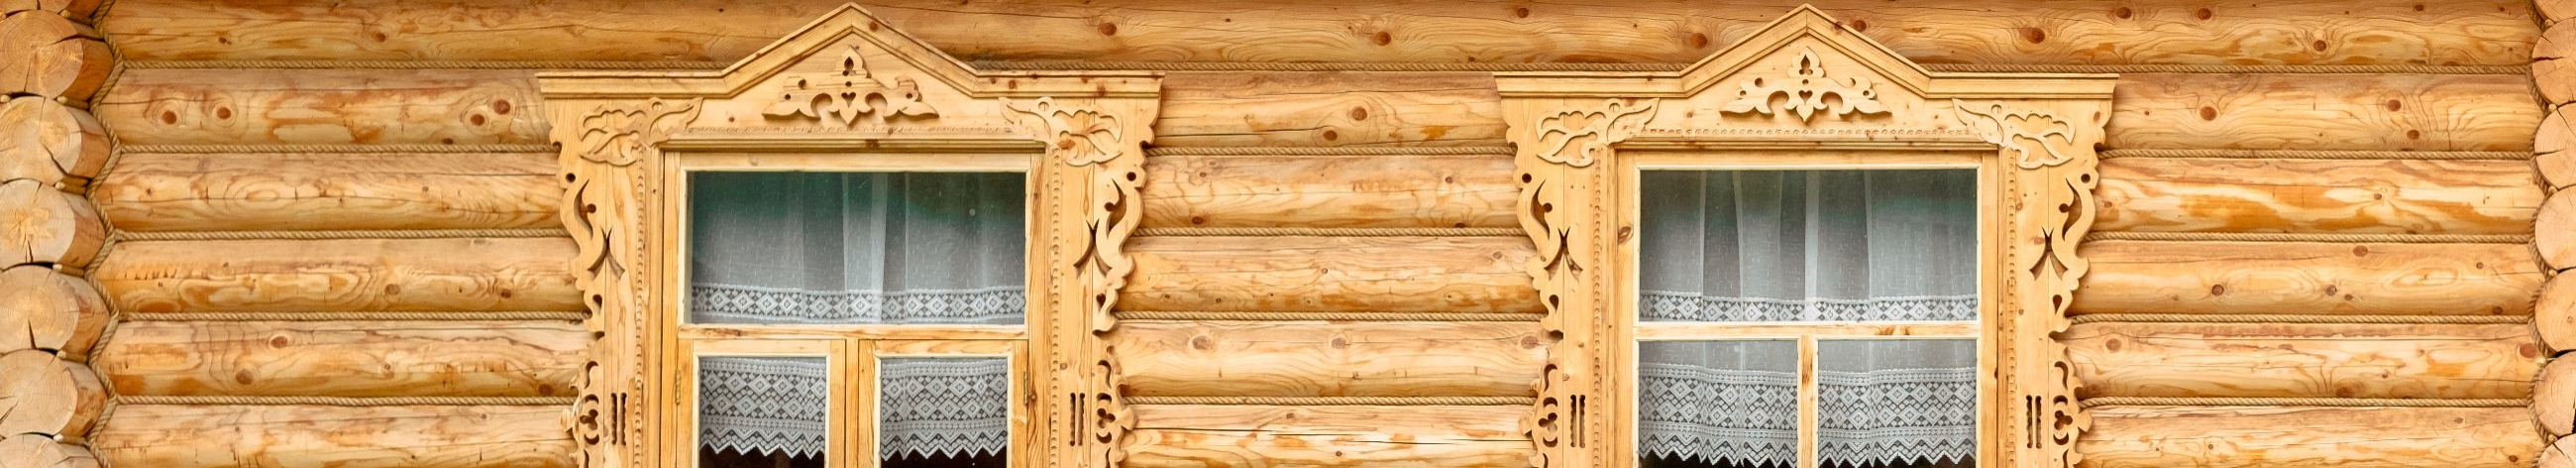 Making stairs, restoration of wood products, making copies, akand and doors, restoration of furniture, custom wood windows, staircase construction, furniture restoration services, wood product restoration, custom woodwork replicas